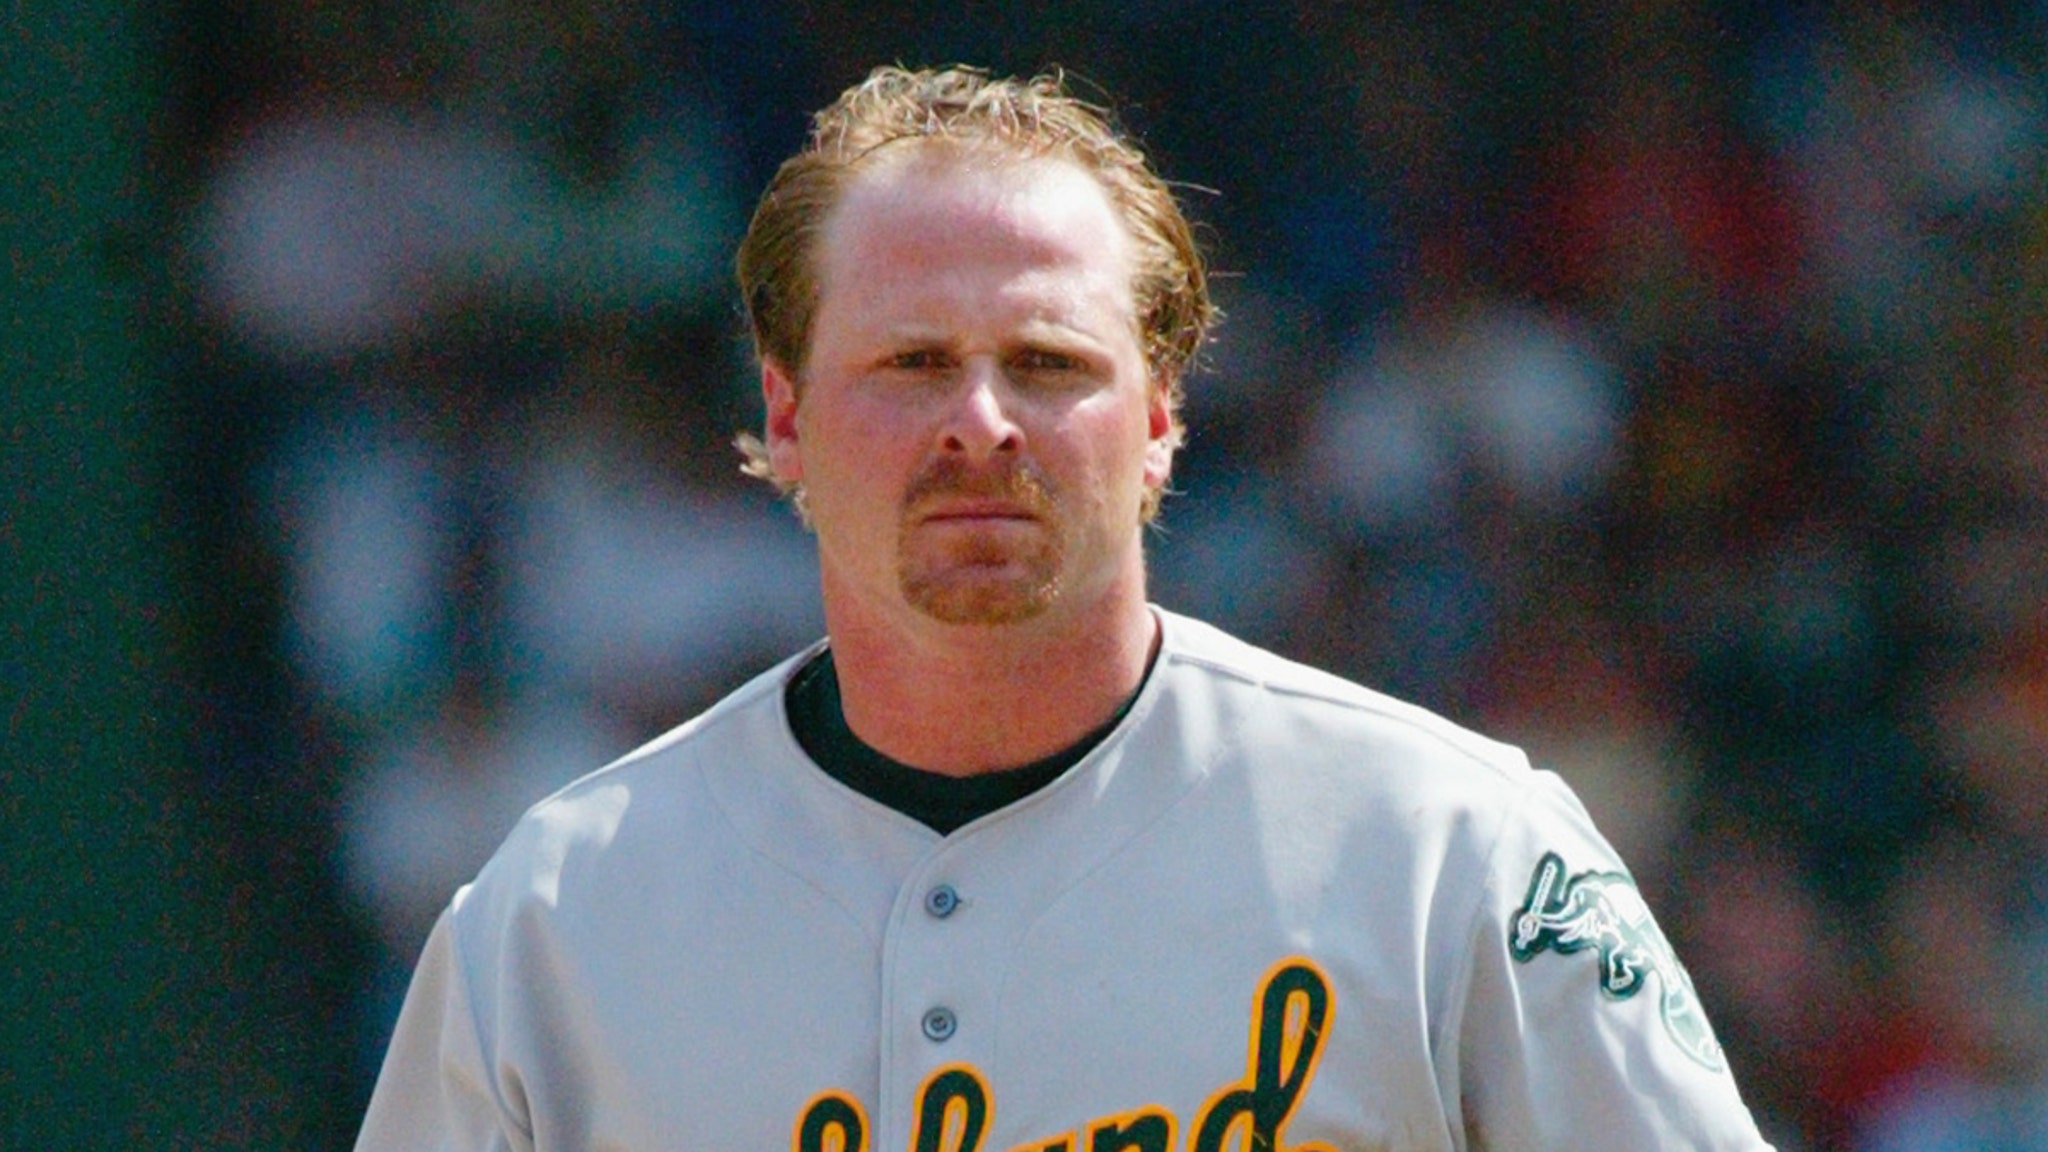 Jeremy Giambi Struck In Head By Baseball 6 Months Before Death, ME Report Reveals thumbnail